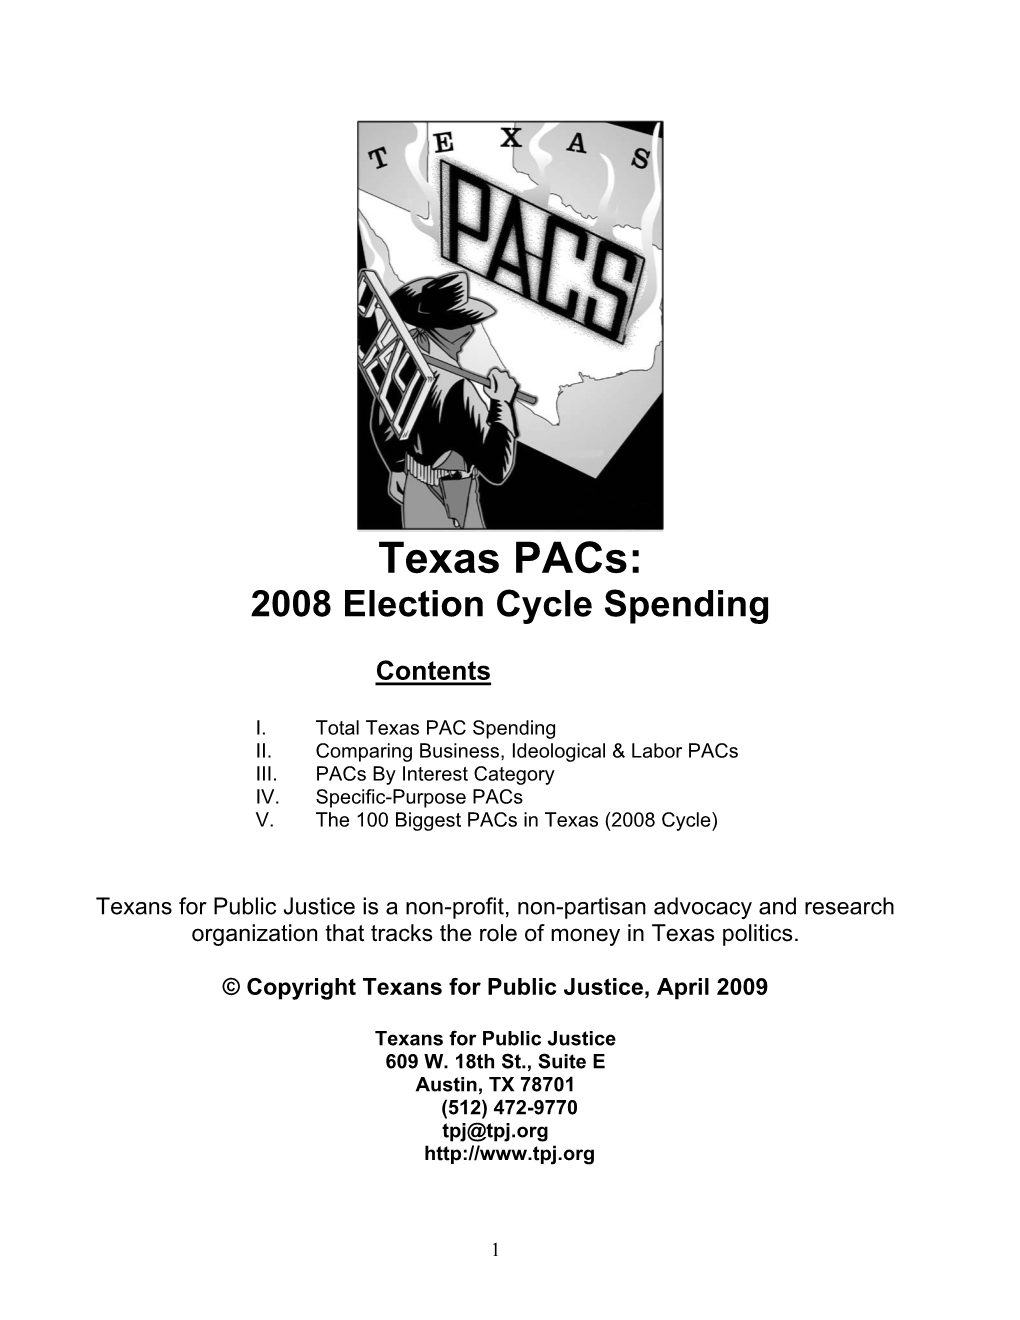 Texas Pacs: 2008 Election Cycle Spending